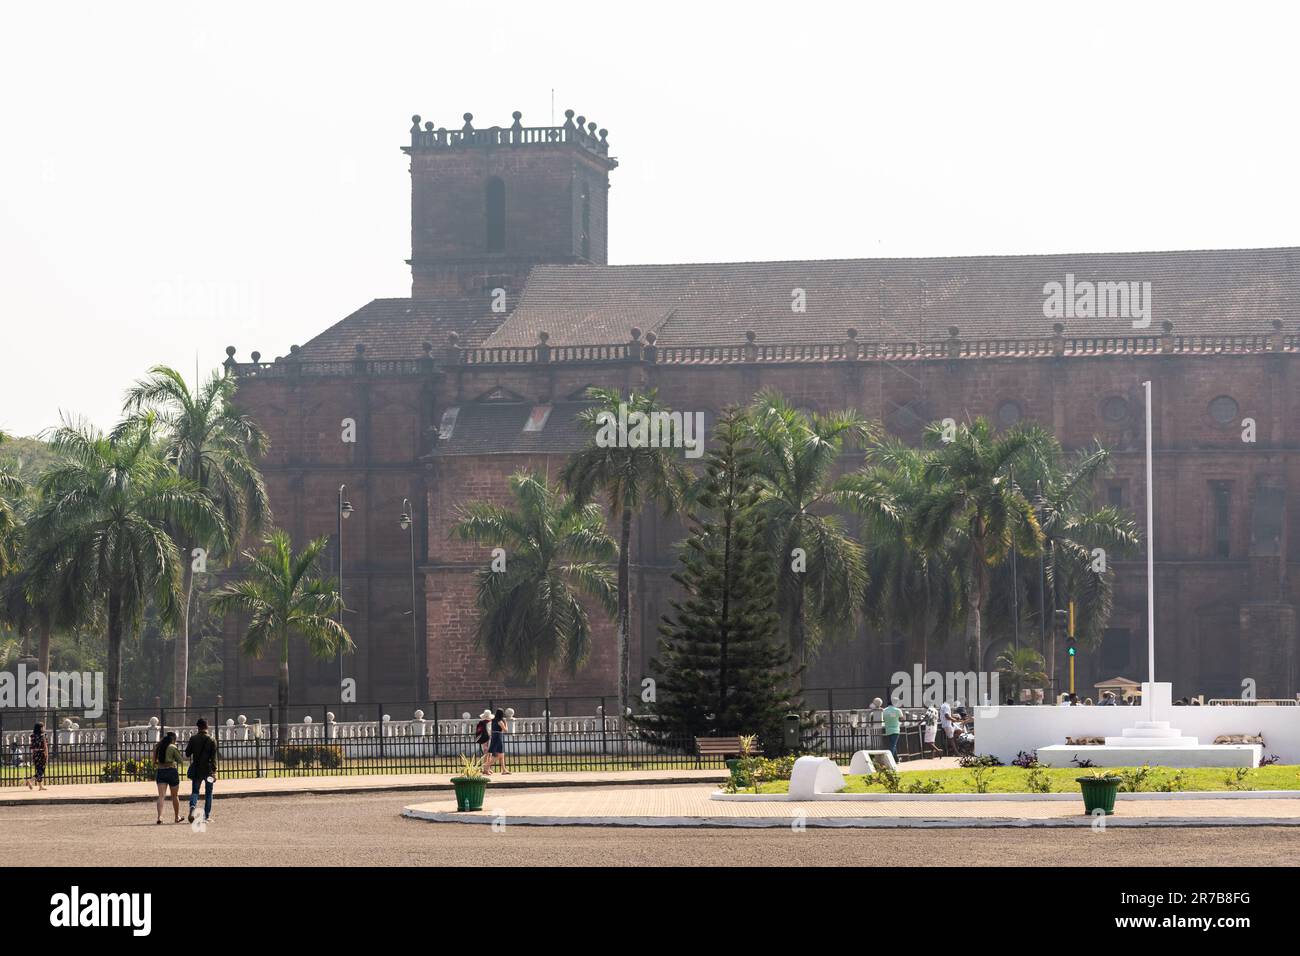 Old Goa, India - January 2023: The exterior facade of the ancient Portuguese era Basilica of Bom Jesus in the UNESCO heritage site of Old Goa. Stock Photo